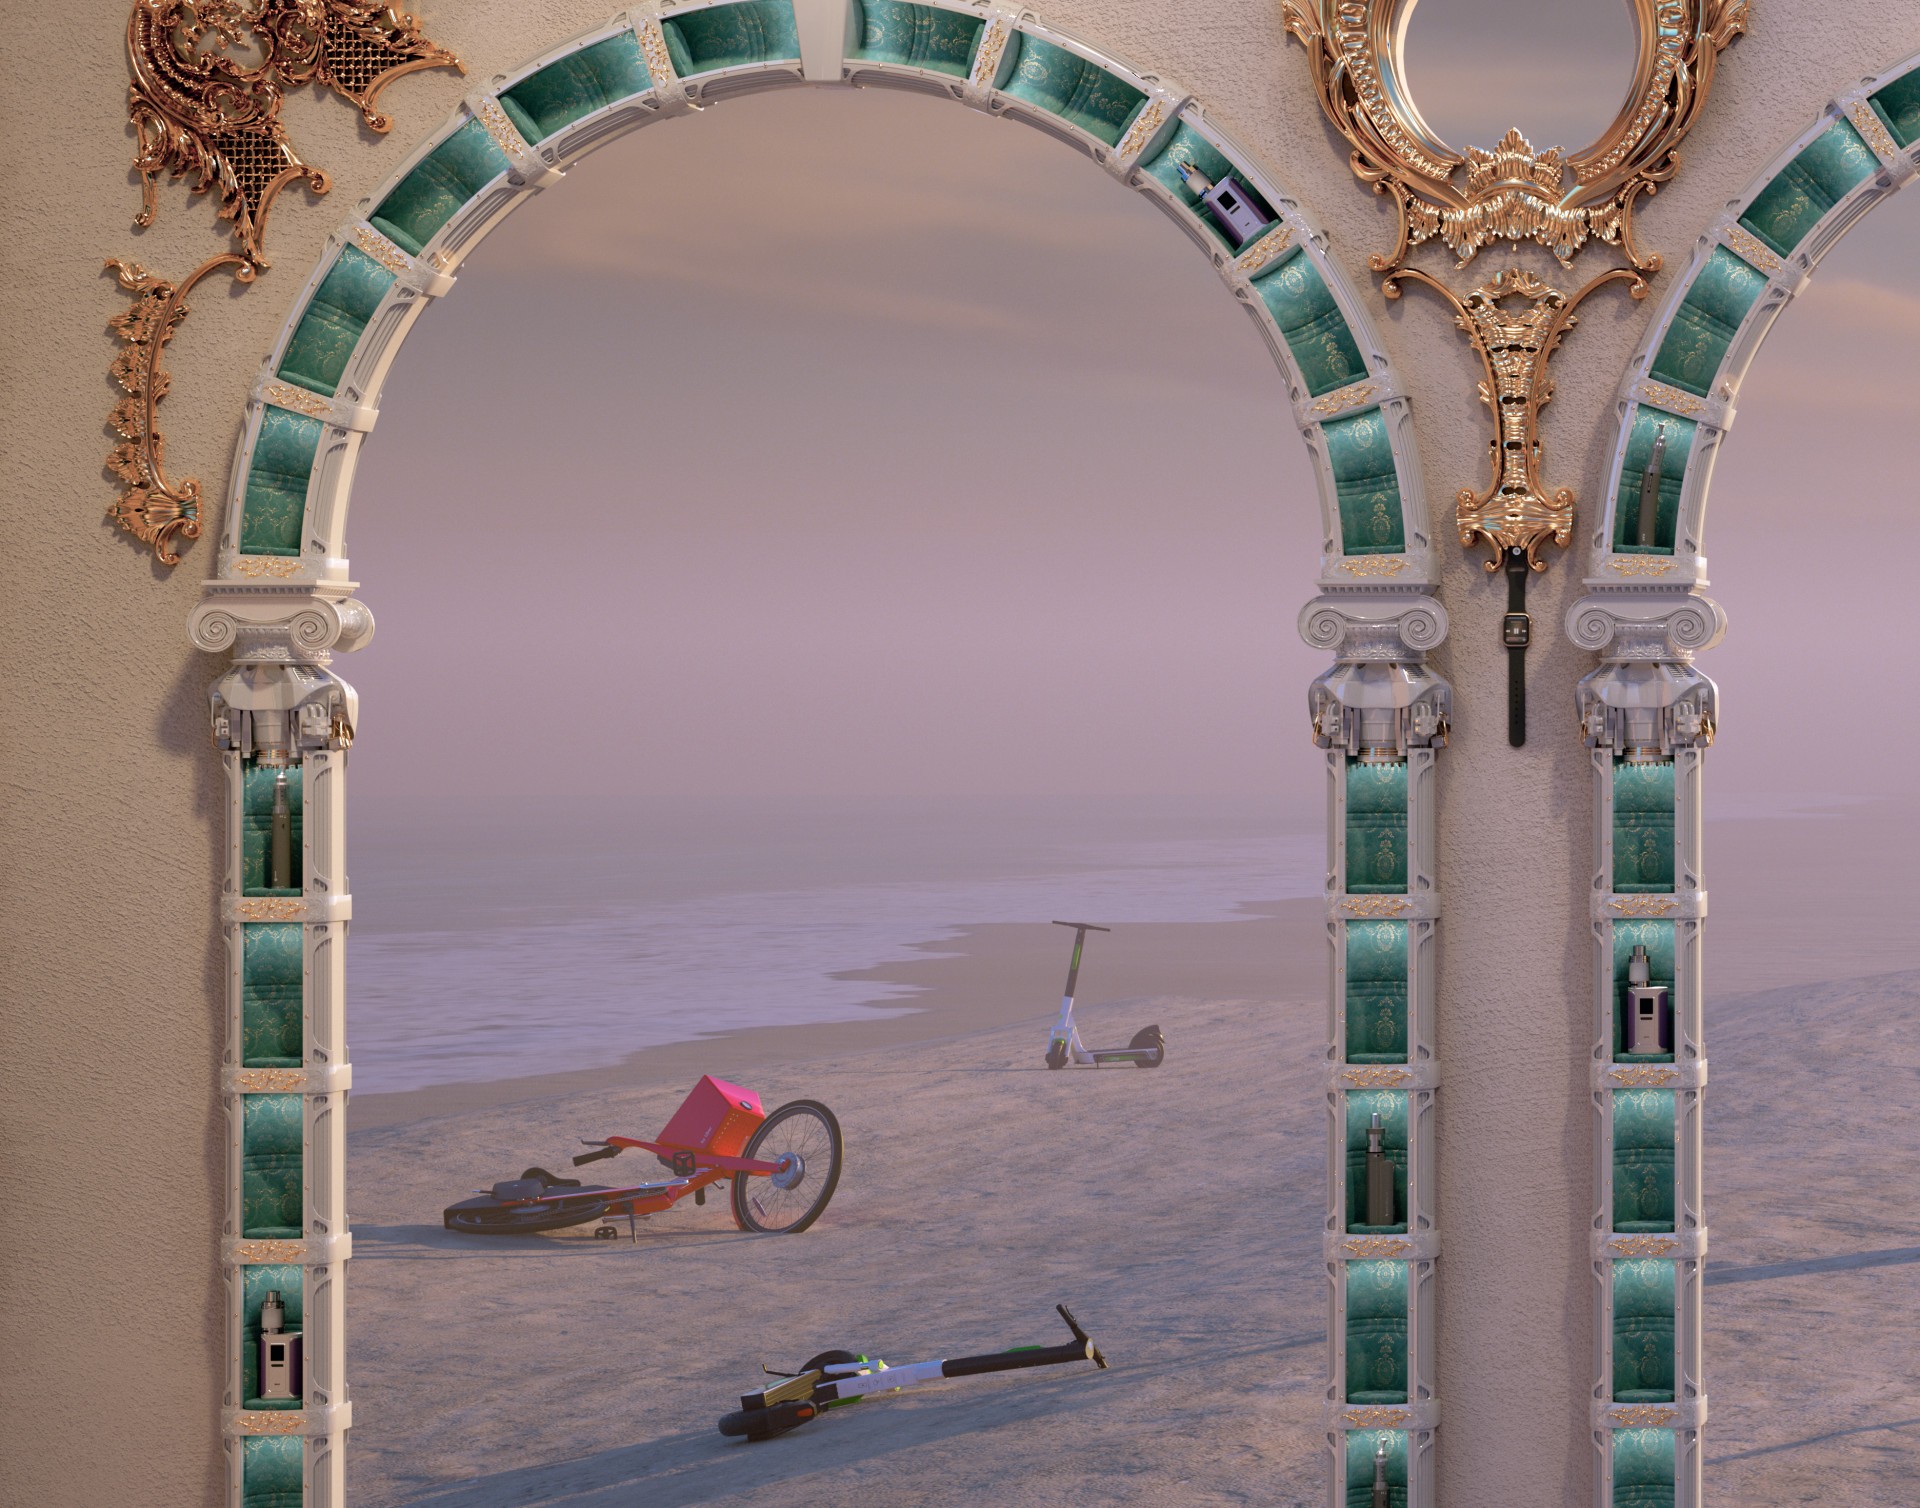 A print depicting abandoned scooters and bicycles on a beach at dawn is placed within elaborate antique moulding and gilded sconces